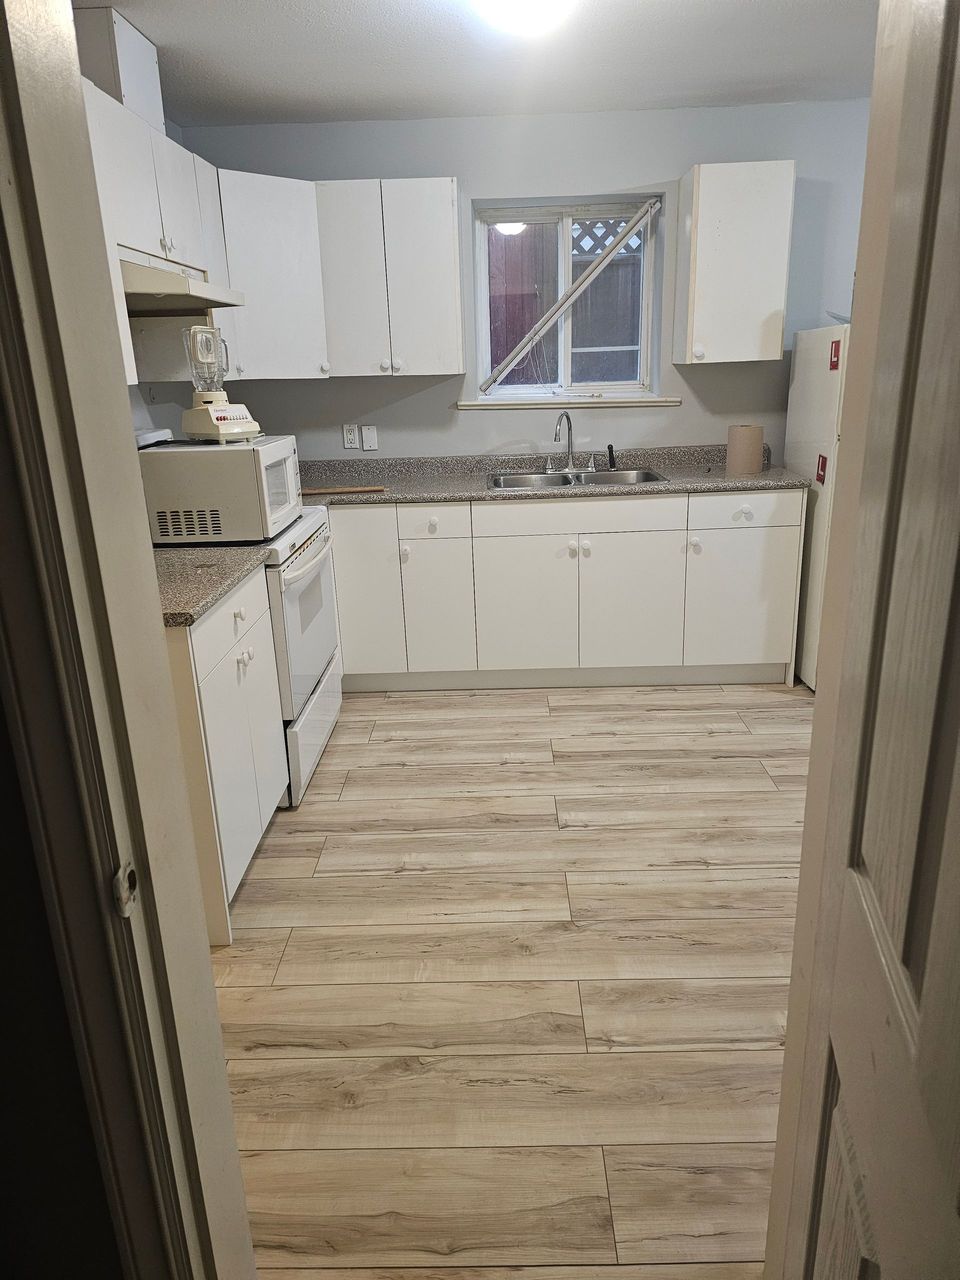 A kitchen with white cabinets and a wooden floor.